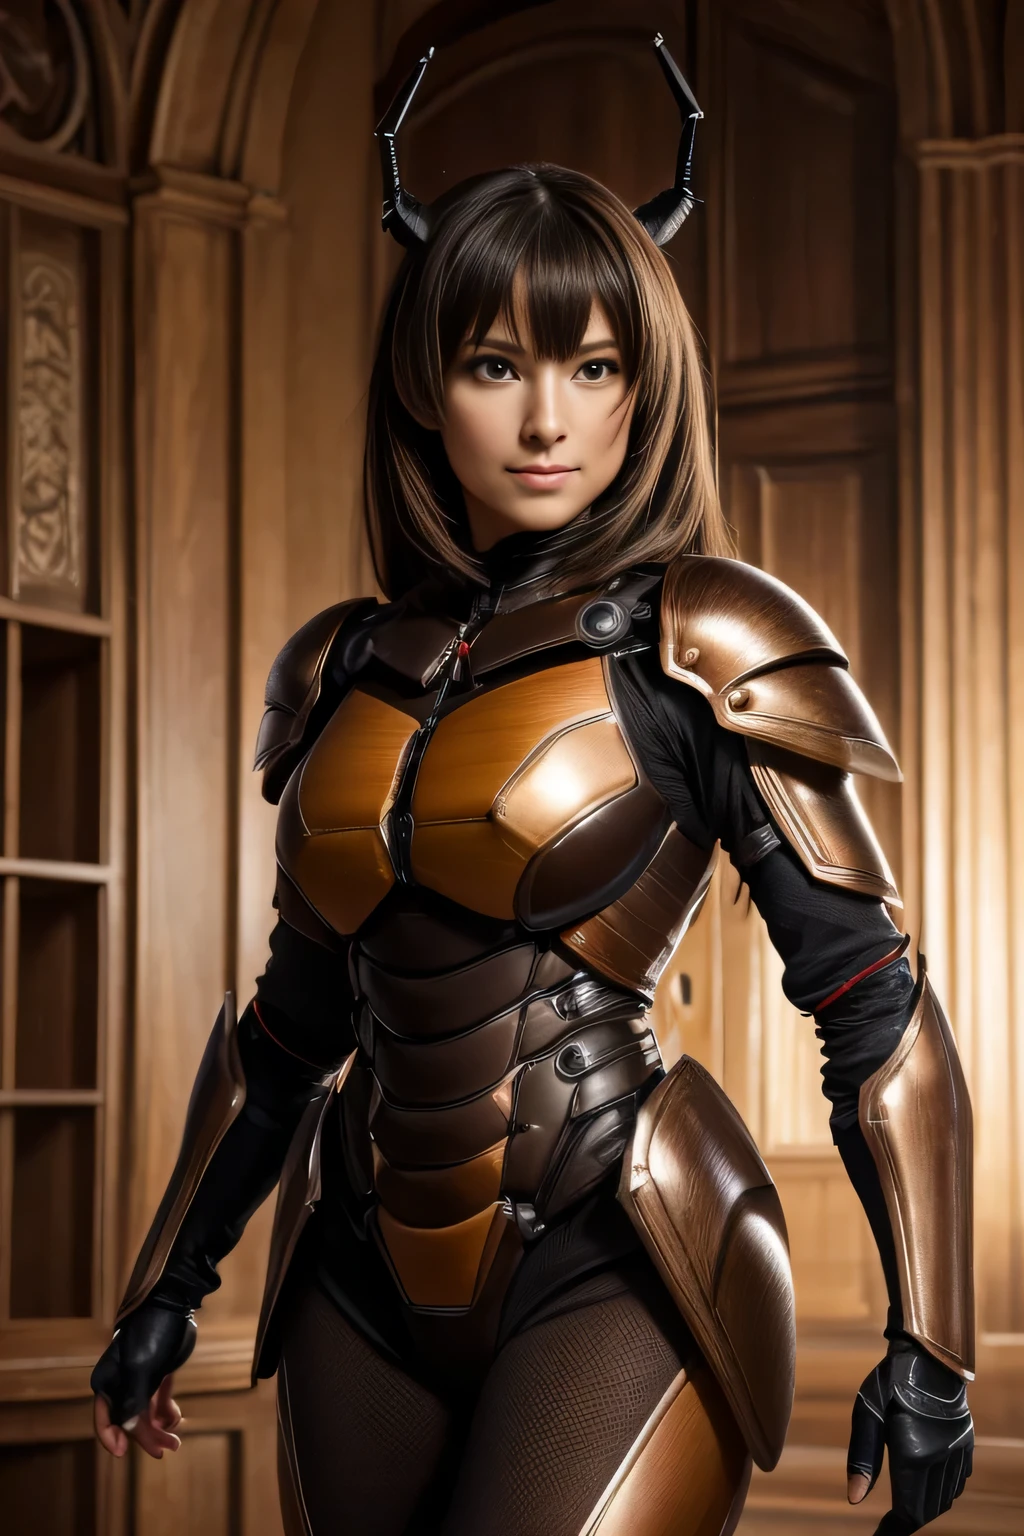 (High resolution,masterpiece,highest quality,Very detailed CG, anime, official art:1.4), realistic, photograph, amazing detail, everything is complicated, shiny and glossy,Amazing number of layers, 8K wallpaper, 3D, sketch, cute, figure,( alone:1.4), perfect female proportions,villain&#39;s daughter, (Fusion of dark brown cockroach and lady:1.4), (brown cockroach woman:1.2), (brown cockroach woman:1.2), (Fusion:1.2), (alone:1.4), (evil smile:1.2), muscular, abs, (Cockroach brown exoskeleton bio insect suit:1.4), (Cockroach brown exoskeleton bio insect armor:1.2), (brown transparent cockroach feathers:1.4), (Antennae of brown cockroaches:1.3),